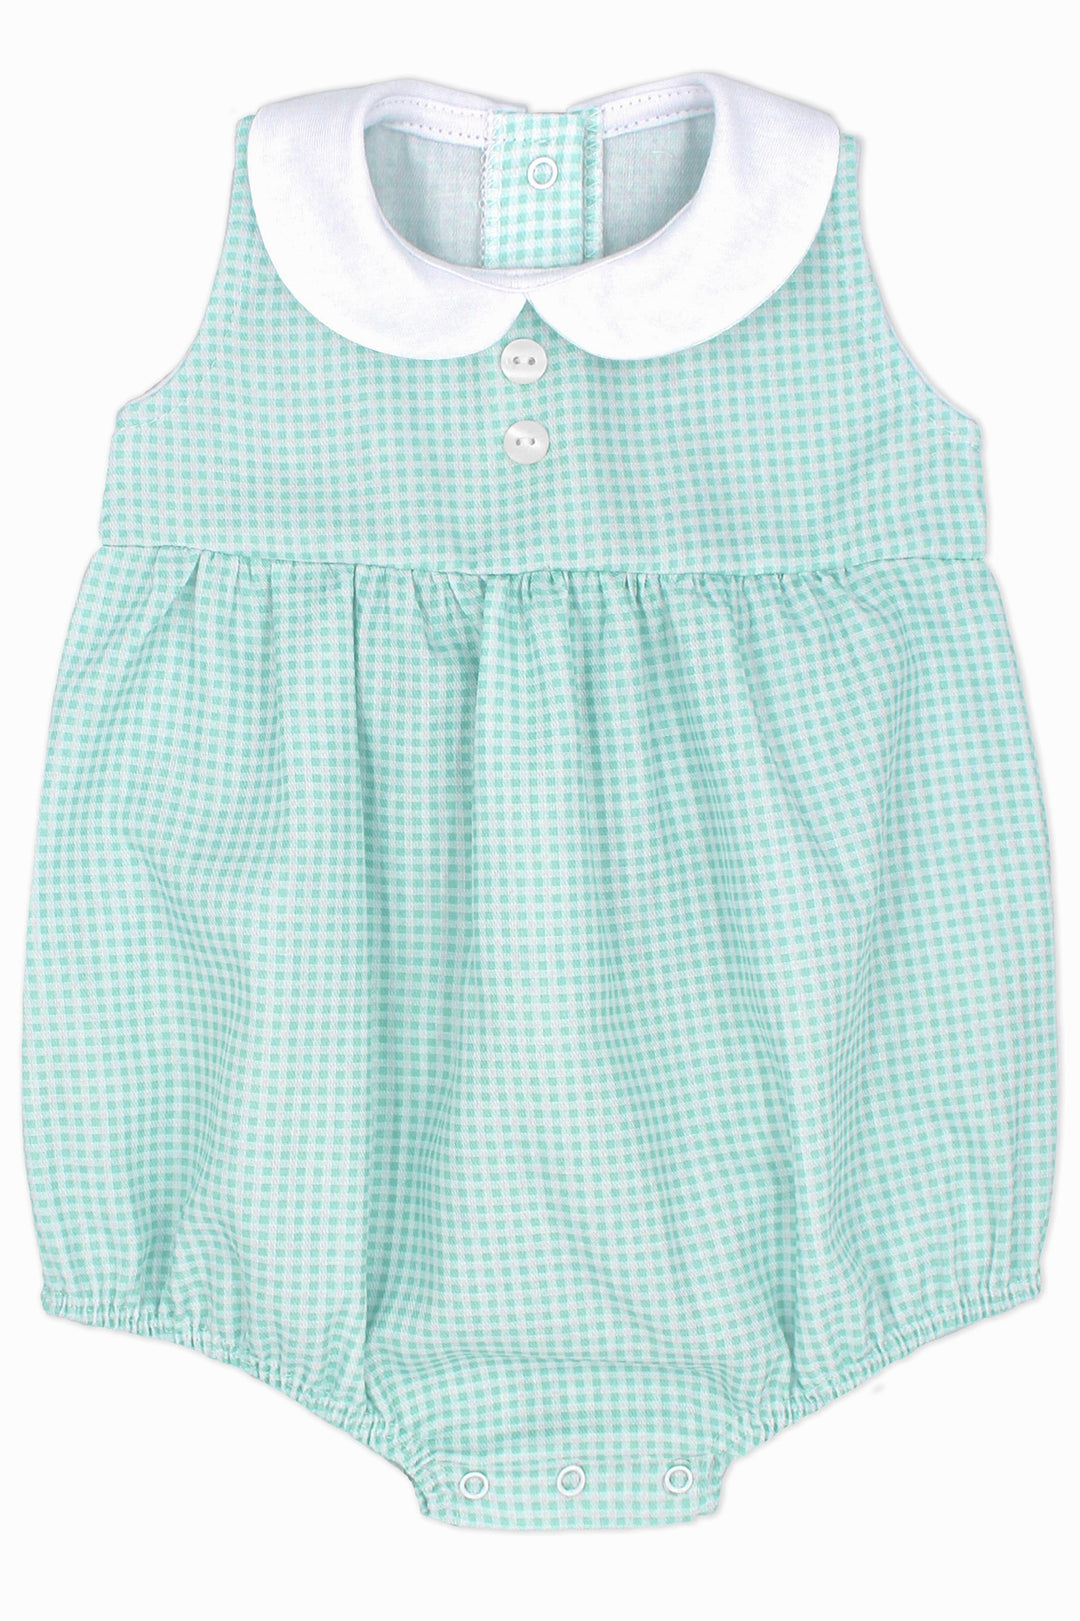 Rapife "Enzo" Turquoise Gingham Romper | Millie and John